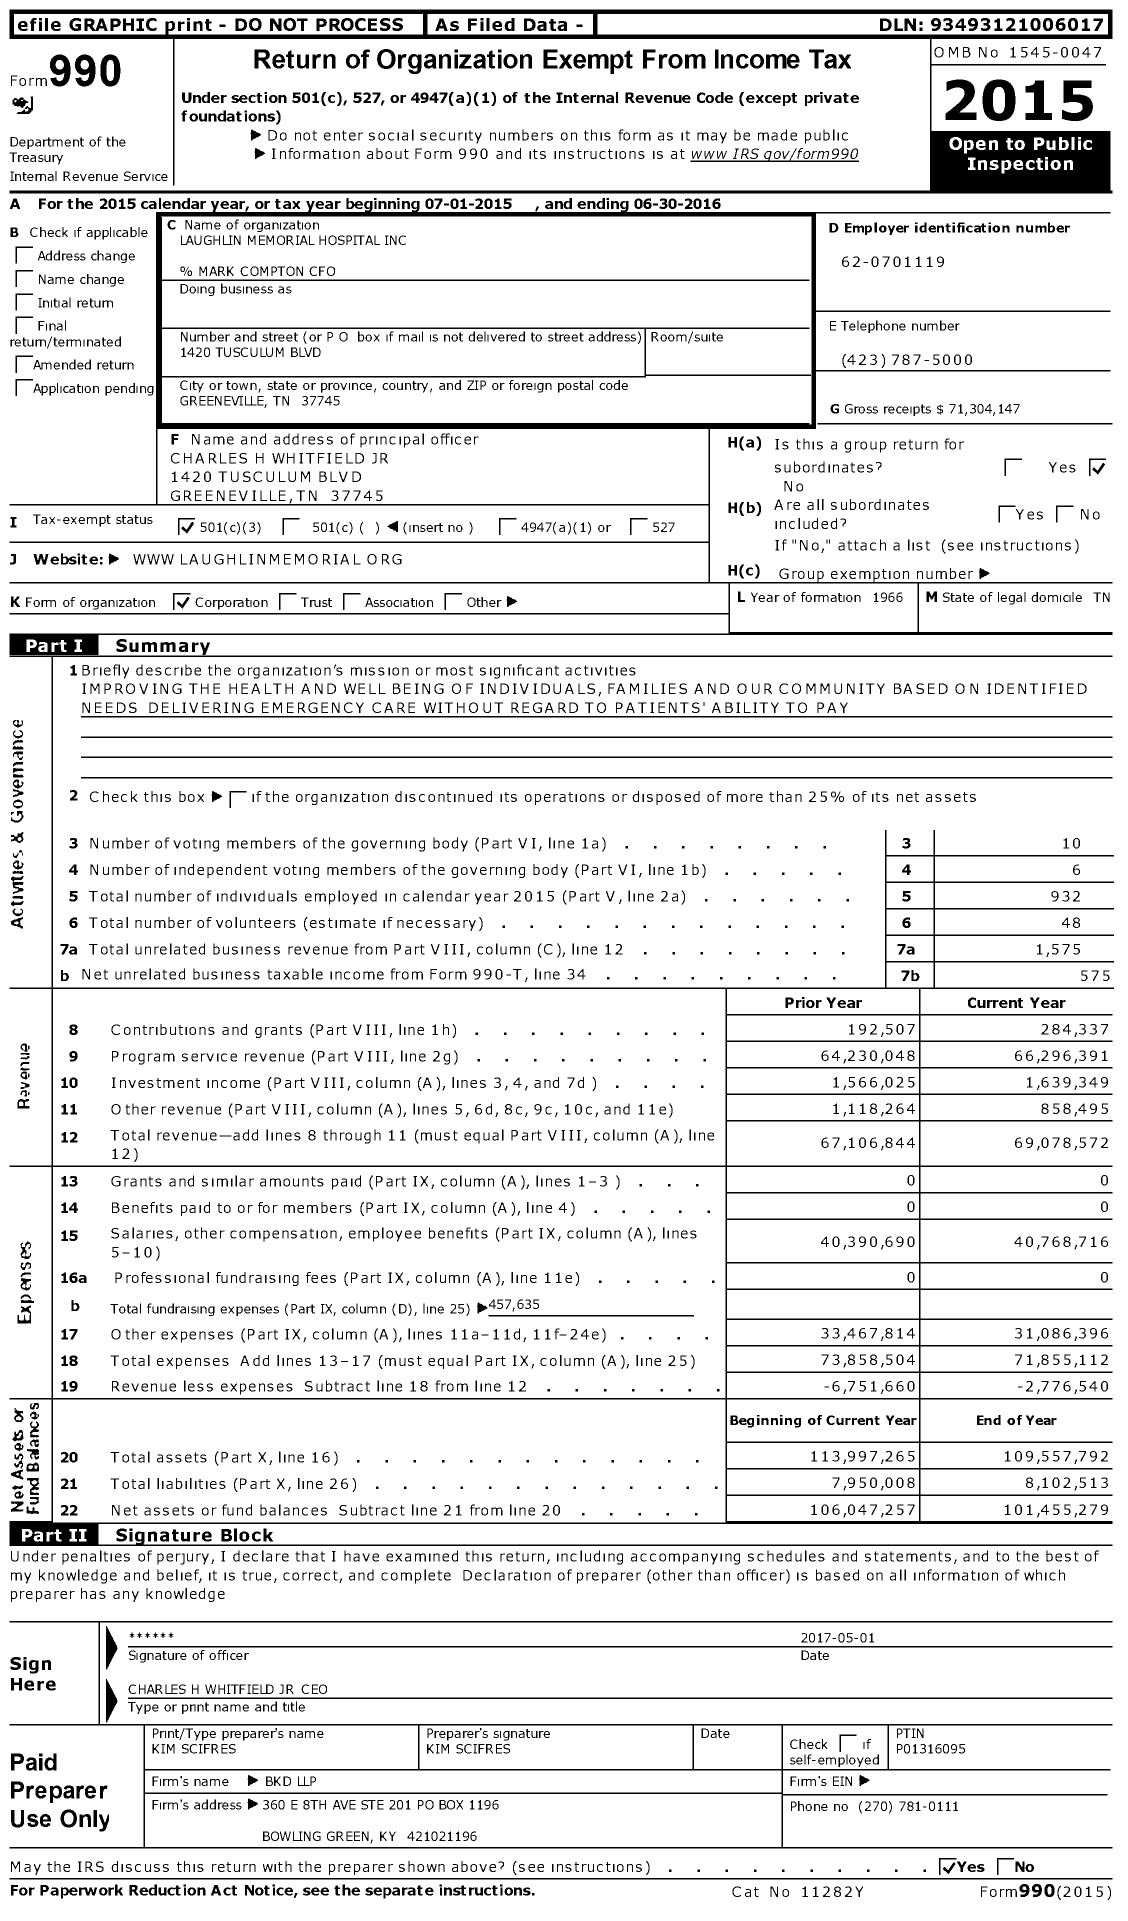 Image of first page of 2015 Form 990 for Laughlin Memorial Hospital